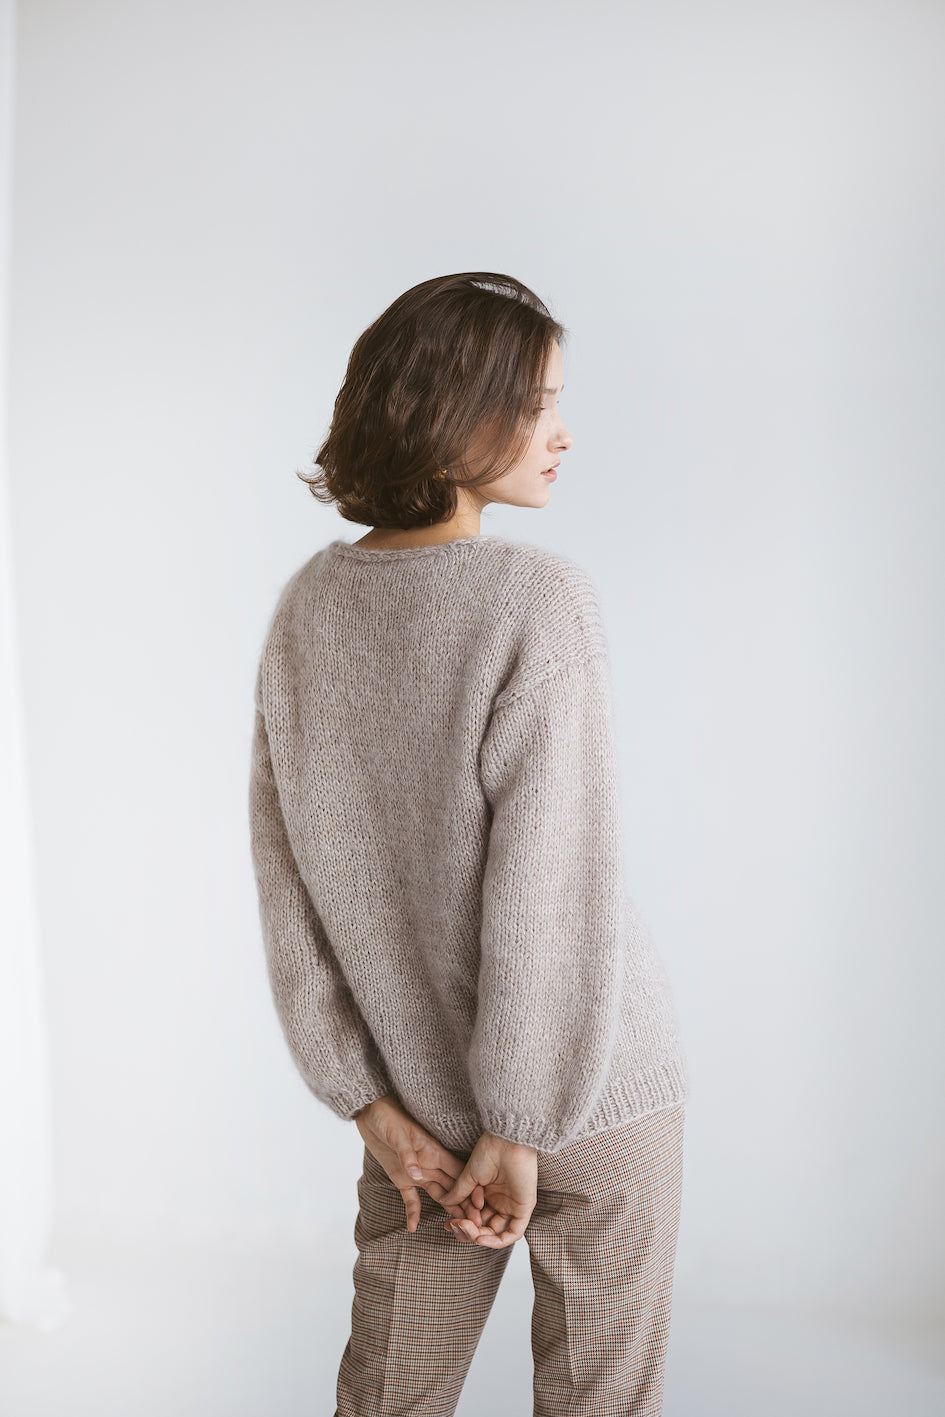 Beige mohair knitted thick sweater, camel alpaca wool blend jumper, taupe fuzzy cable knit pullover, creamy fluffy slightly oversized pull